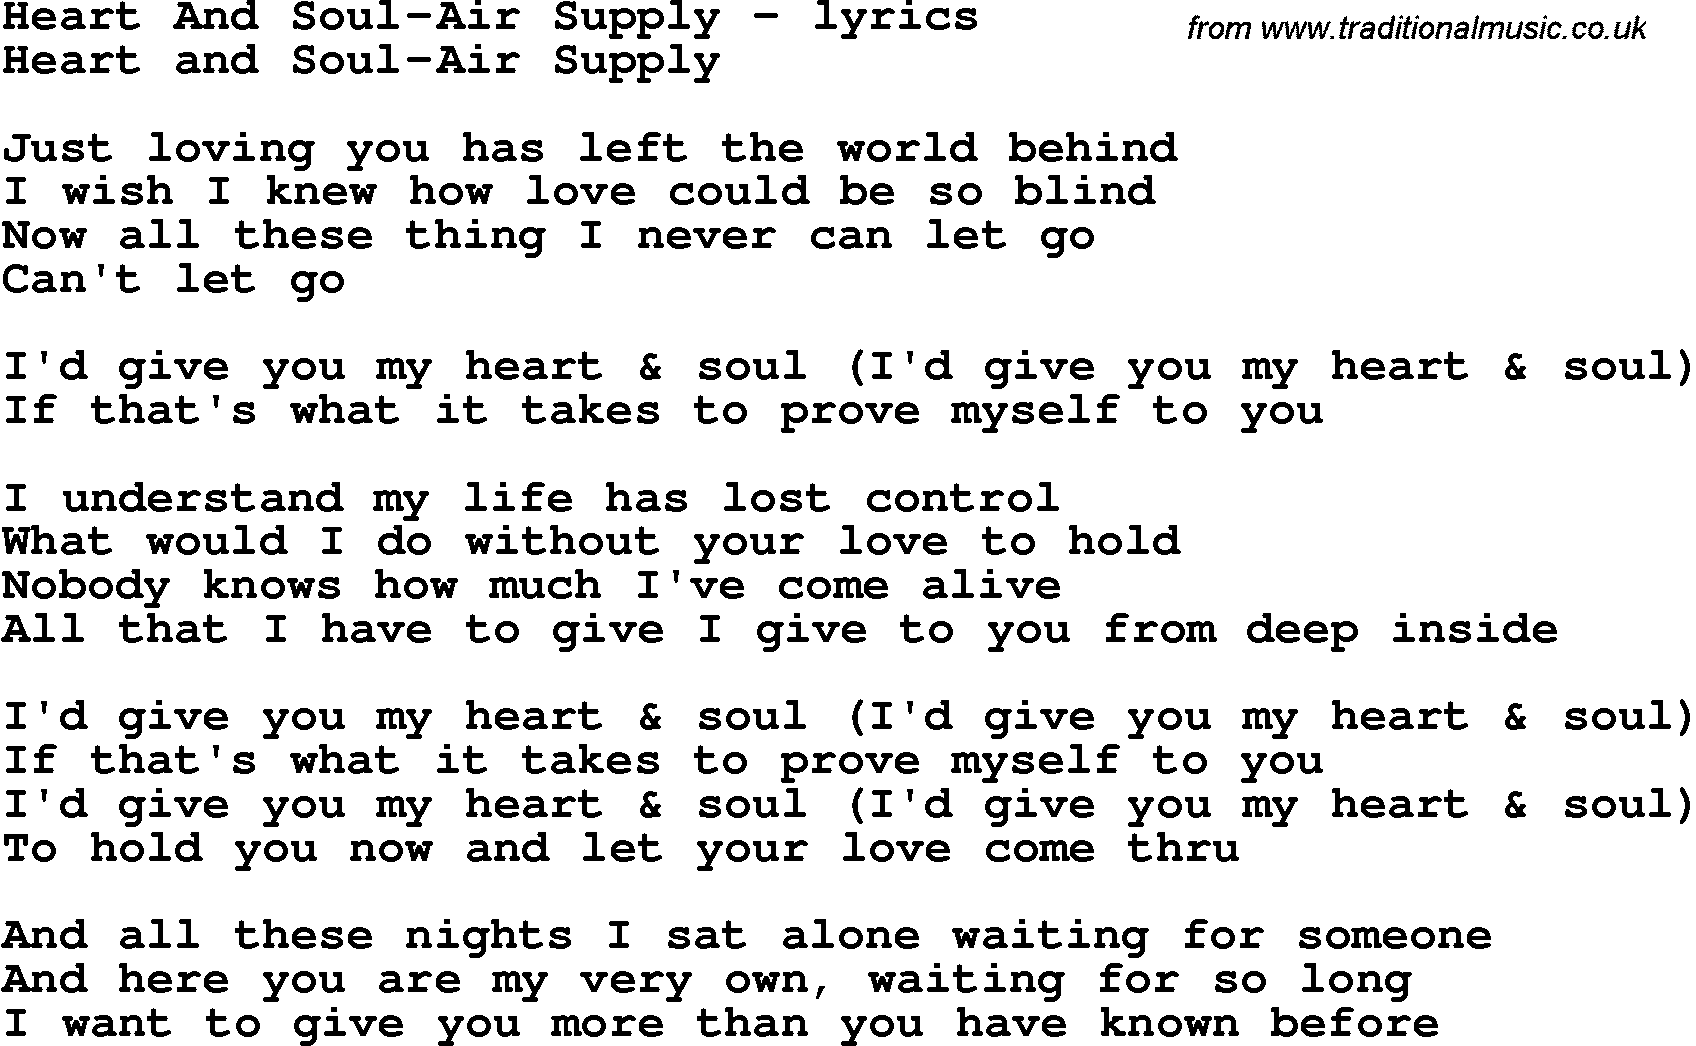 Love Song Lyrics for: Heart And Soul-Air Supply